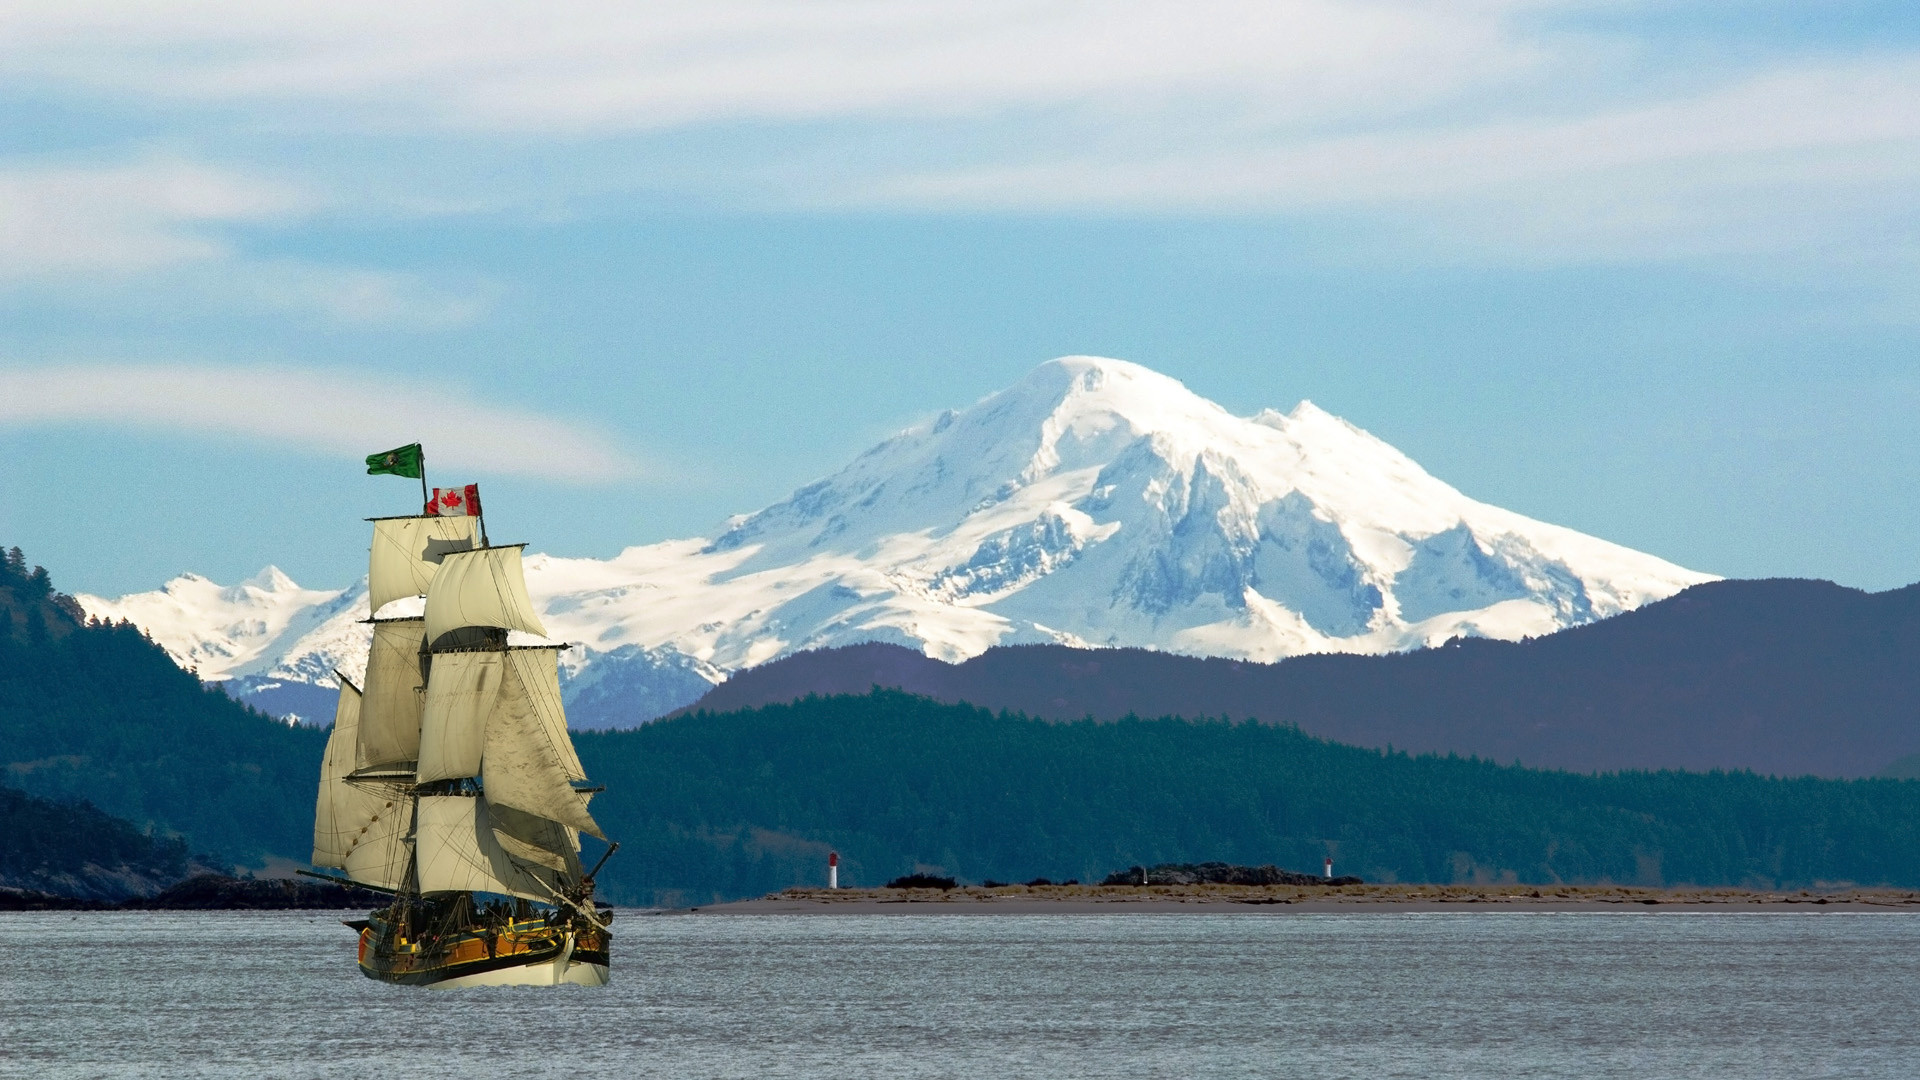 1920x1080 Mount Baker and Sidney Island Are a Backdrop to the Tall Ship Lady  Washington Sailing Off Saanich Peninsula on Vancouver Island, British  Columbia, Canada